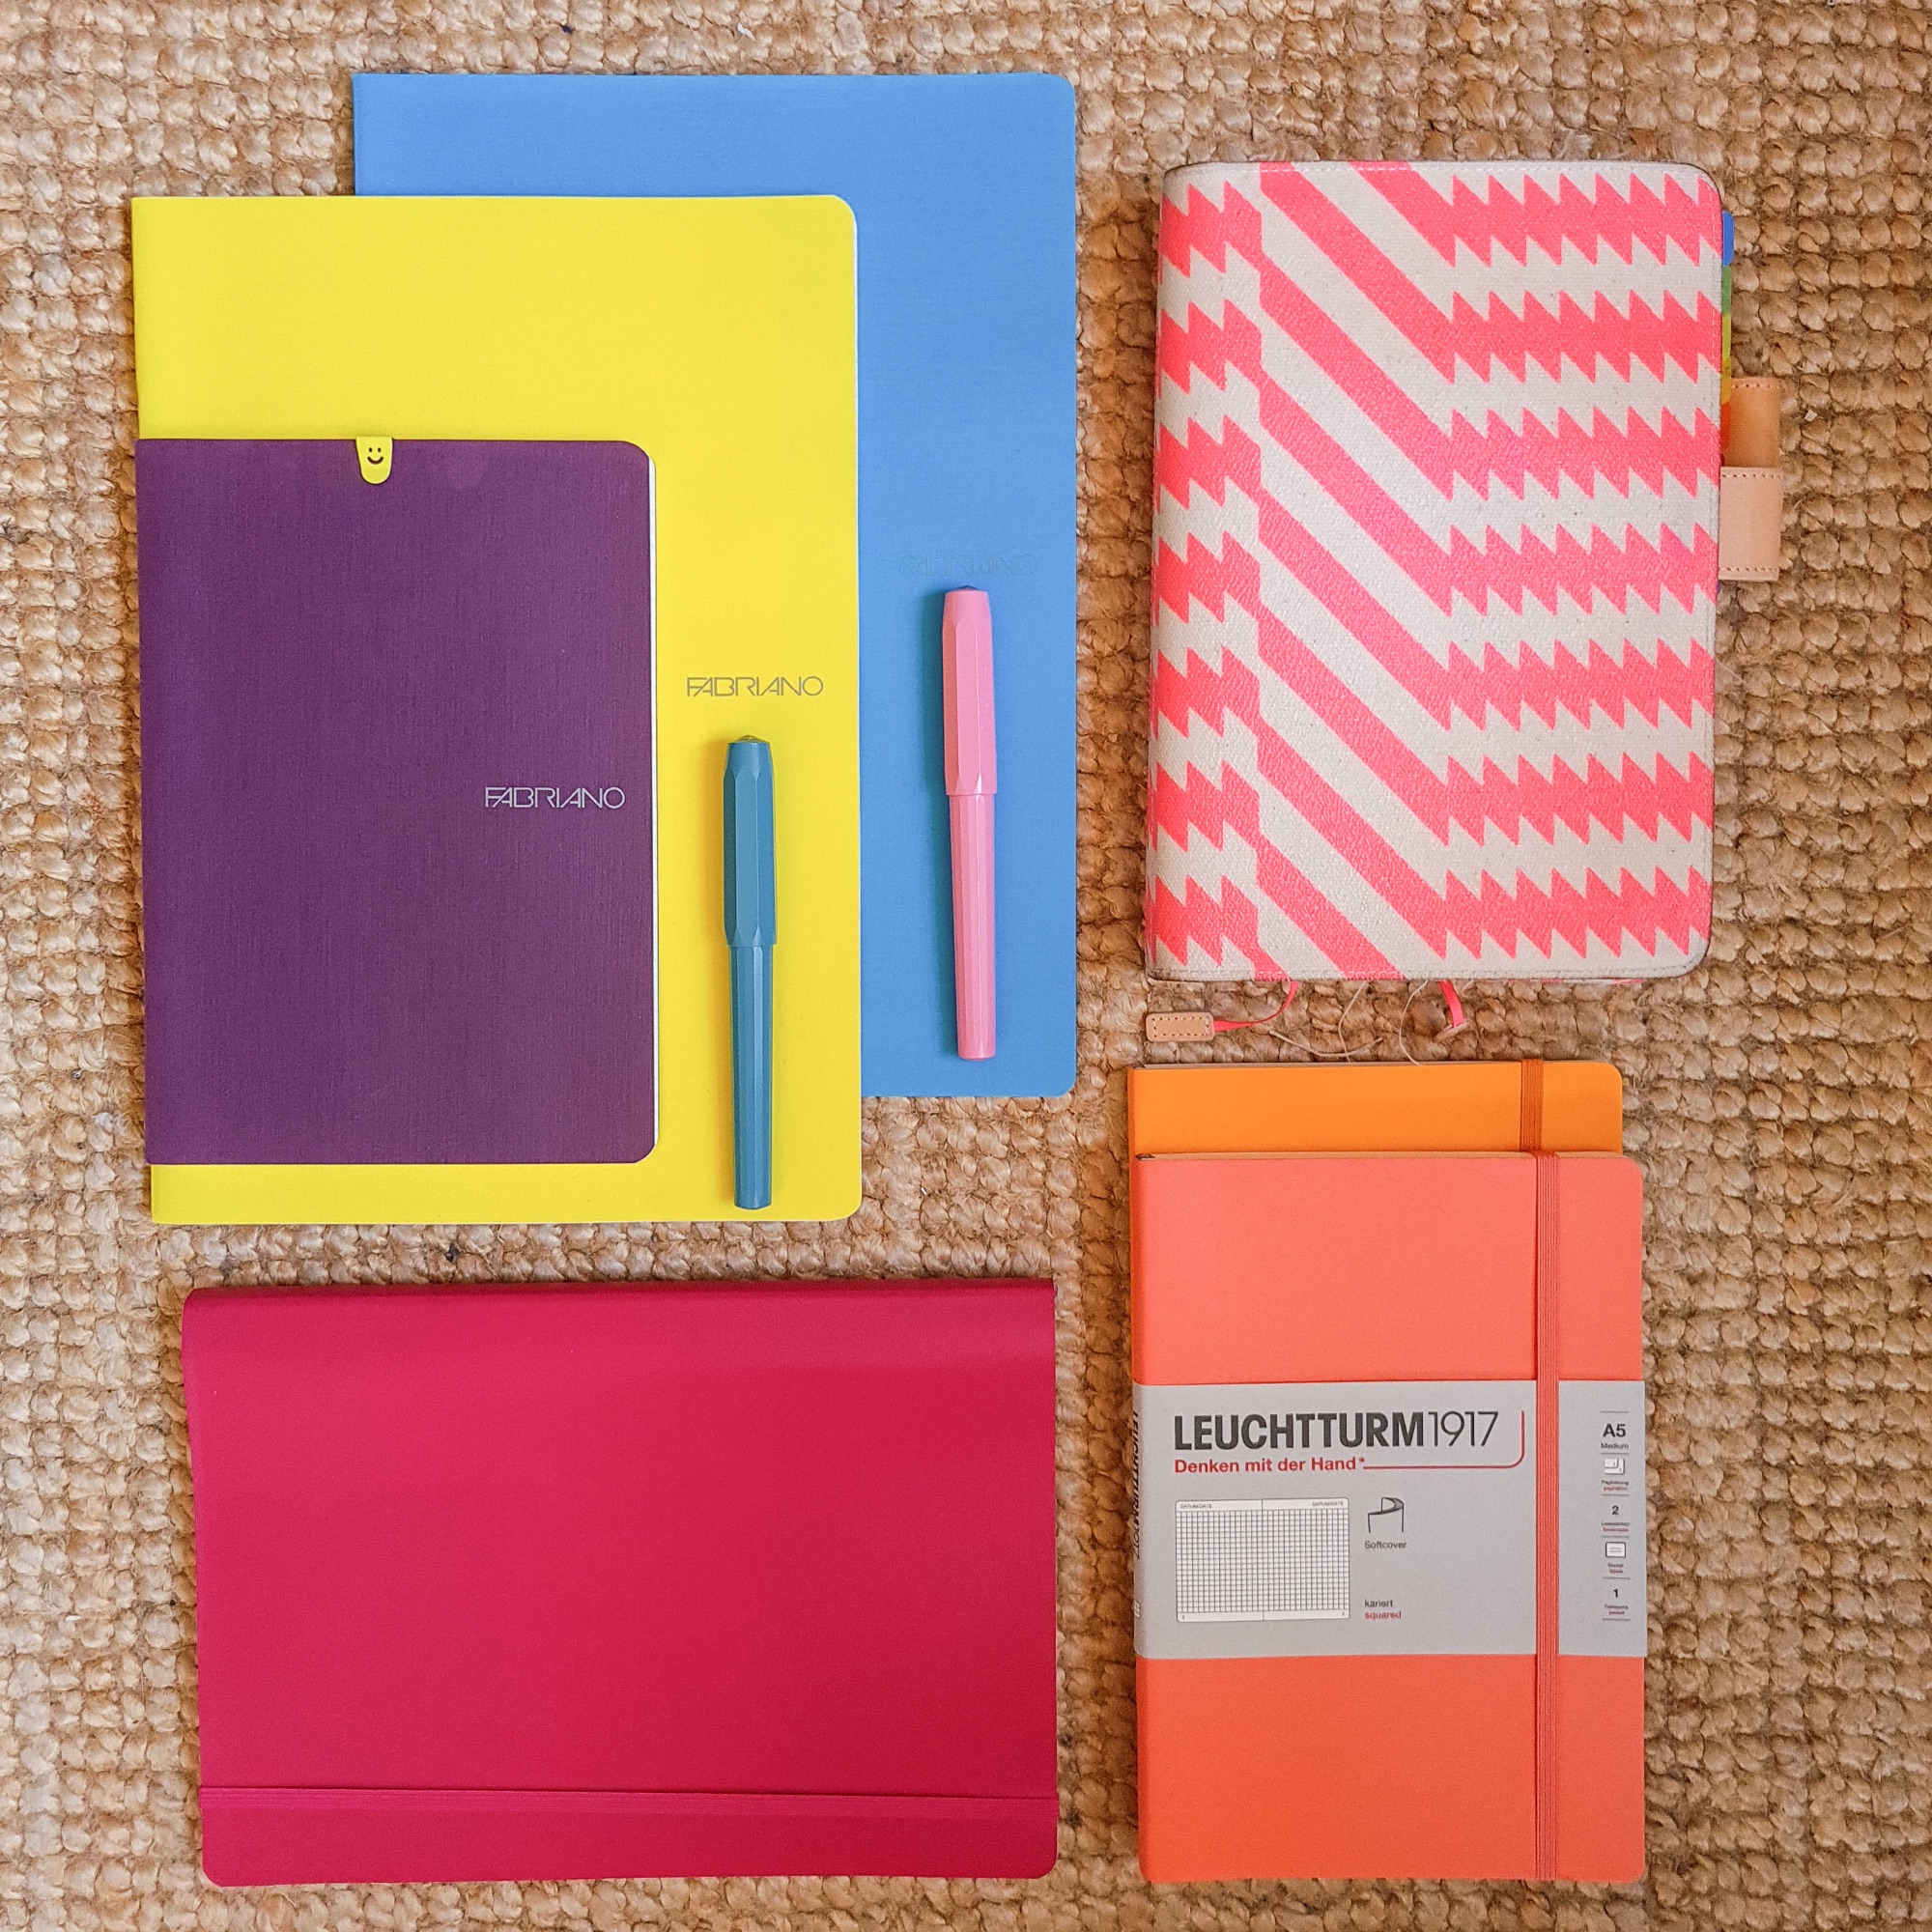 Flaylay of colourful notebooks and pens